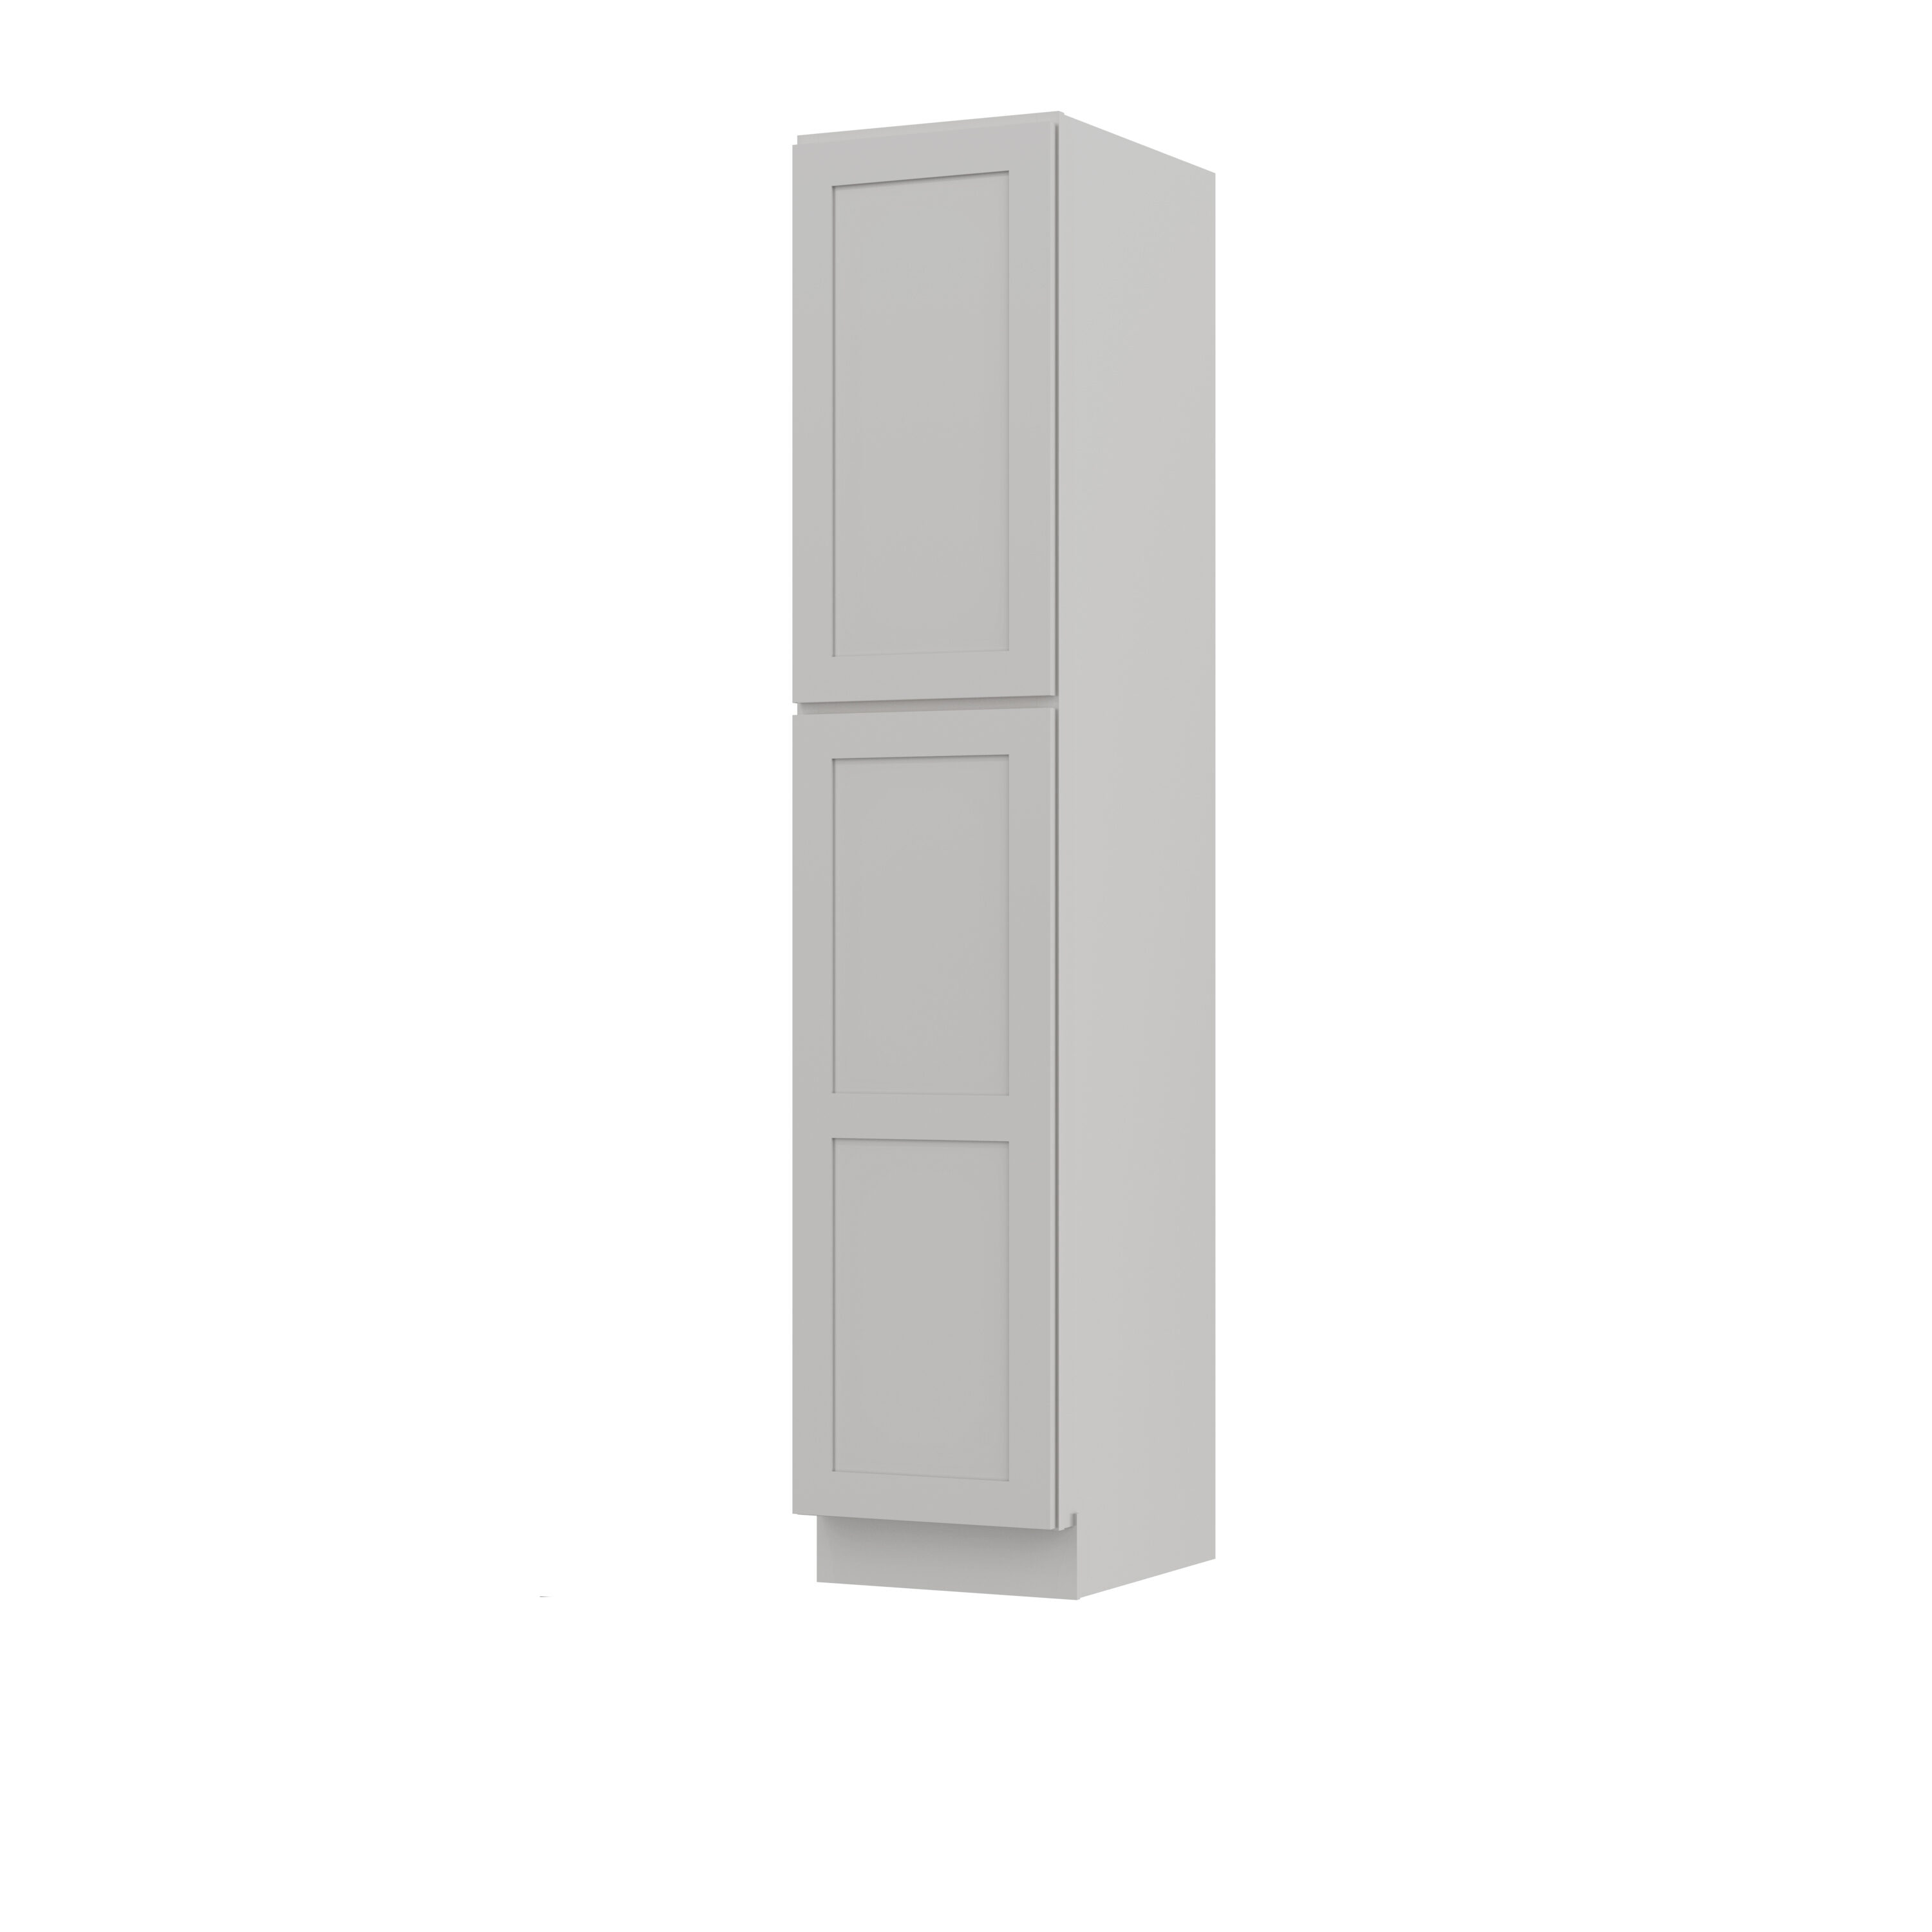 VEVOR Kitchen Pantry Cabinet 60 in. Tall Food Pantry Storage